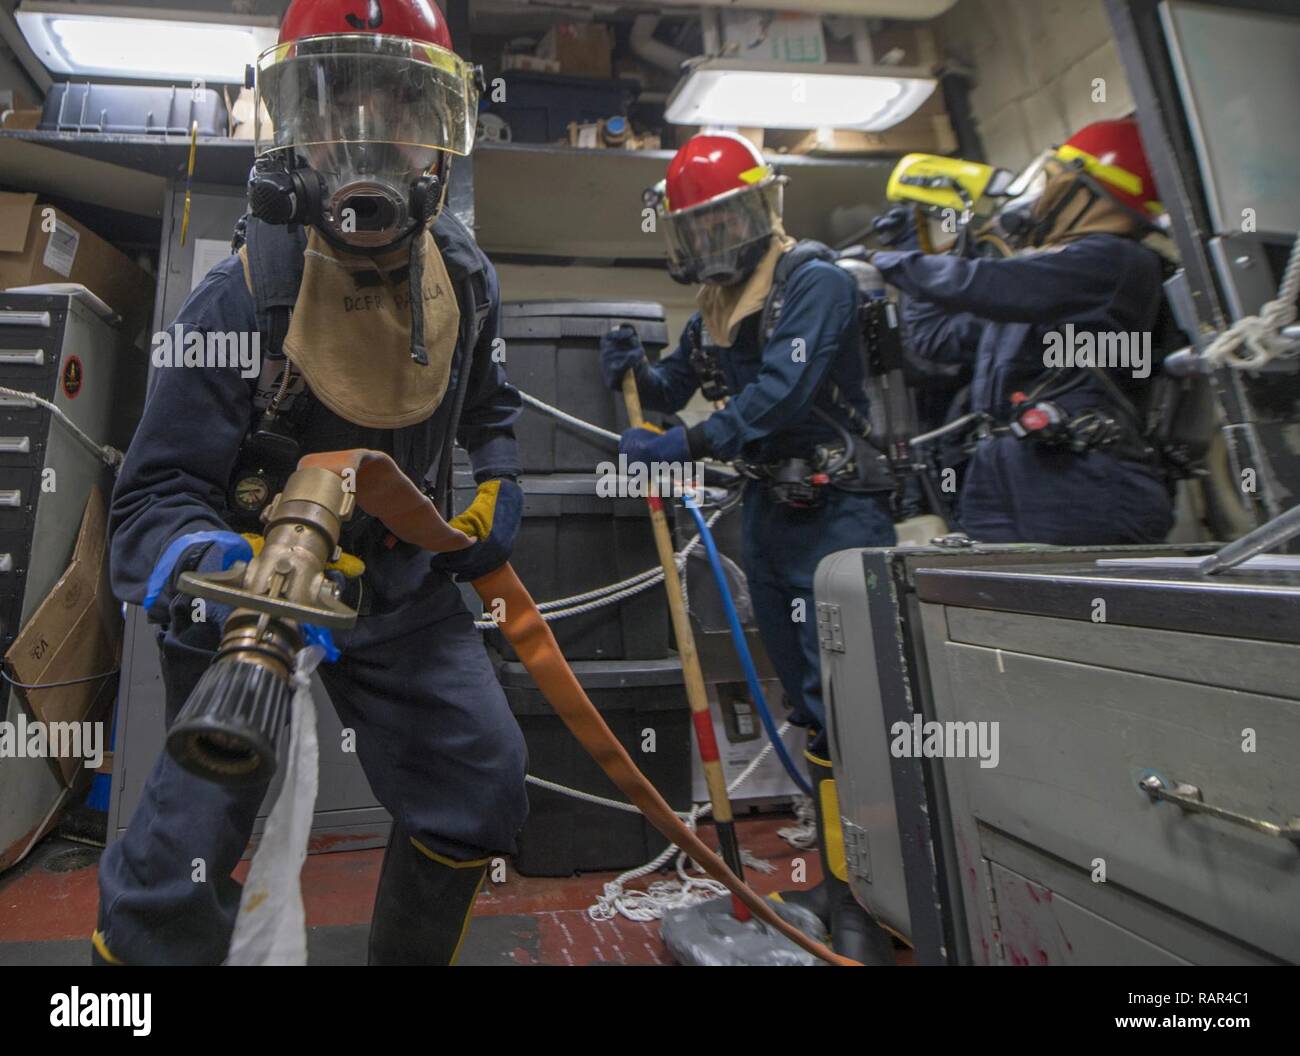 EAST CHINA SEA (Dec. 10, 2018) Damage Controlman Fireman Recruit Johnnie Padilla, from Los Angeles, Cali., left, fights a simulated fire during an exercise aboard the Arleigh Burke-class guided-missile destroyer USS McCampbell (DDG 85). McCampbell is forward-deployed to the U.S. 7th Fleet area of operations in support of security and stability in the Indo-Pacific region. Stock Photo